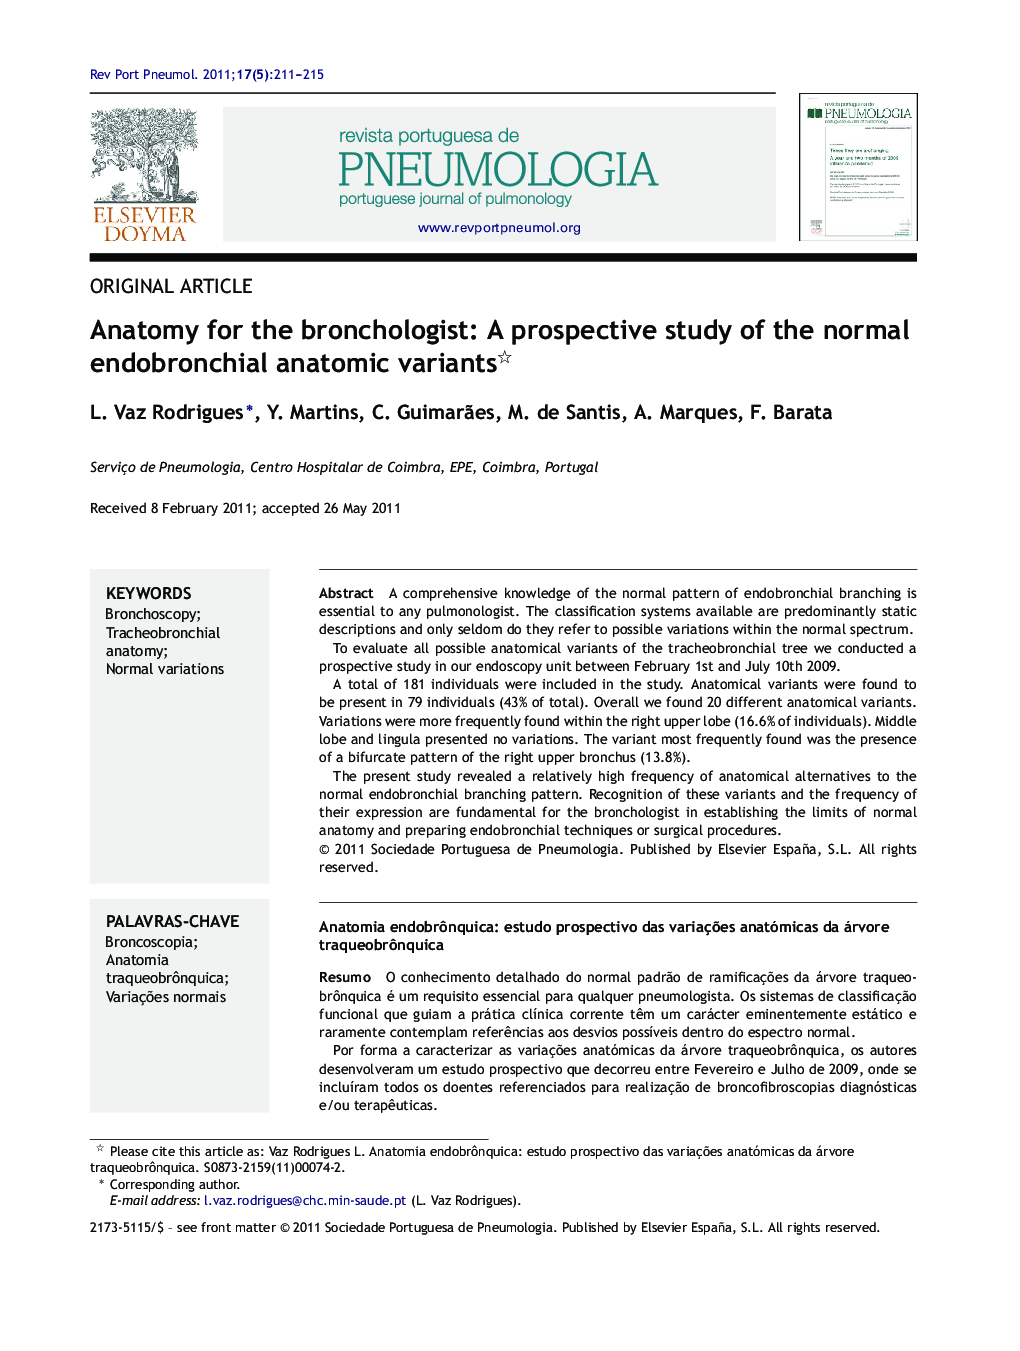 Anatomy for the bronchologist: A prospective study of the normal endobronchial anatomic variants